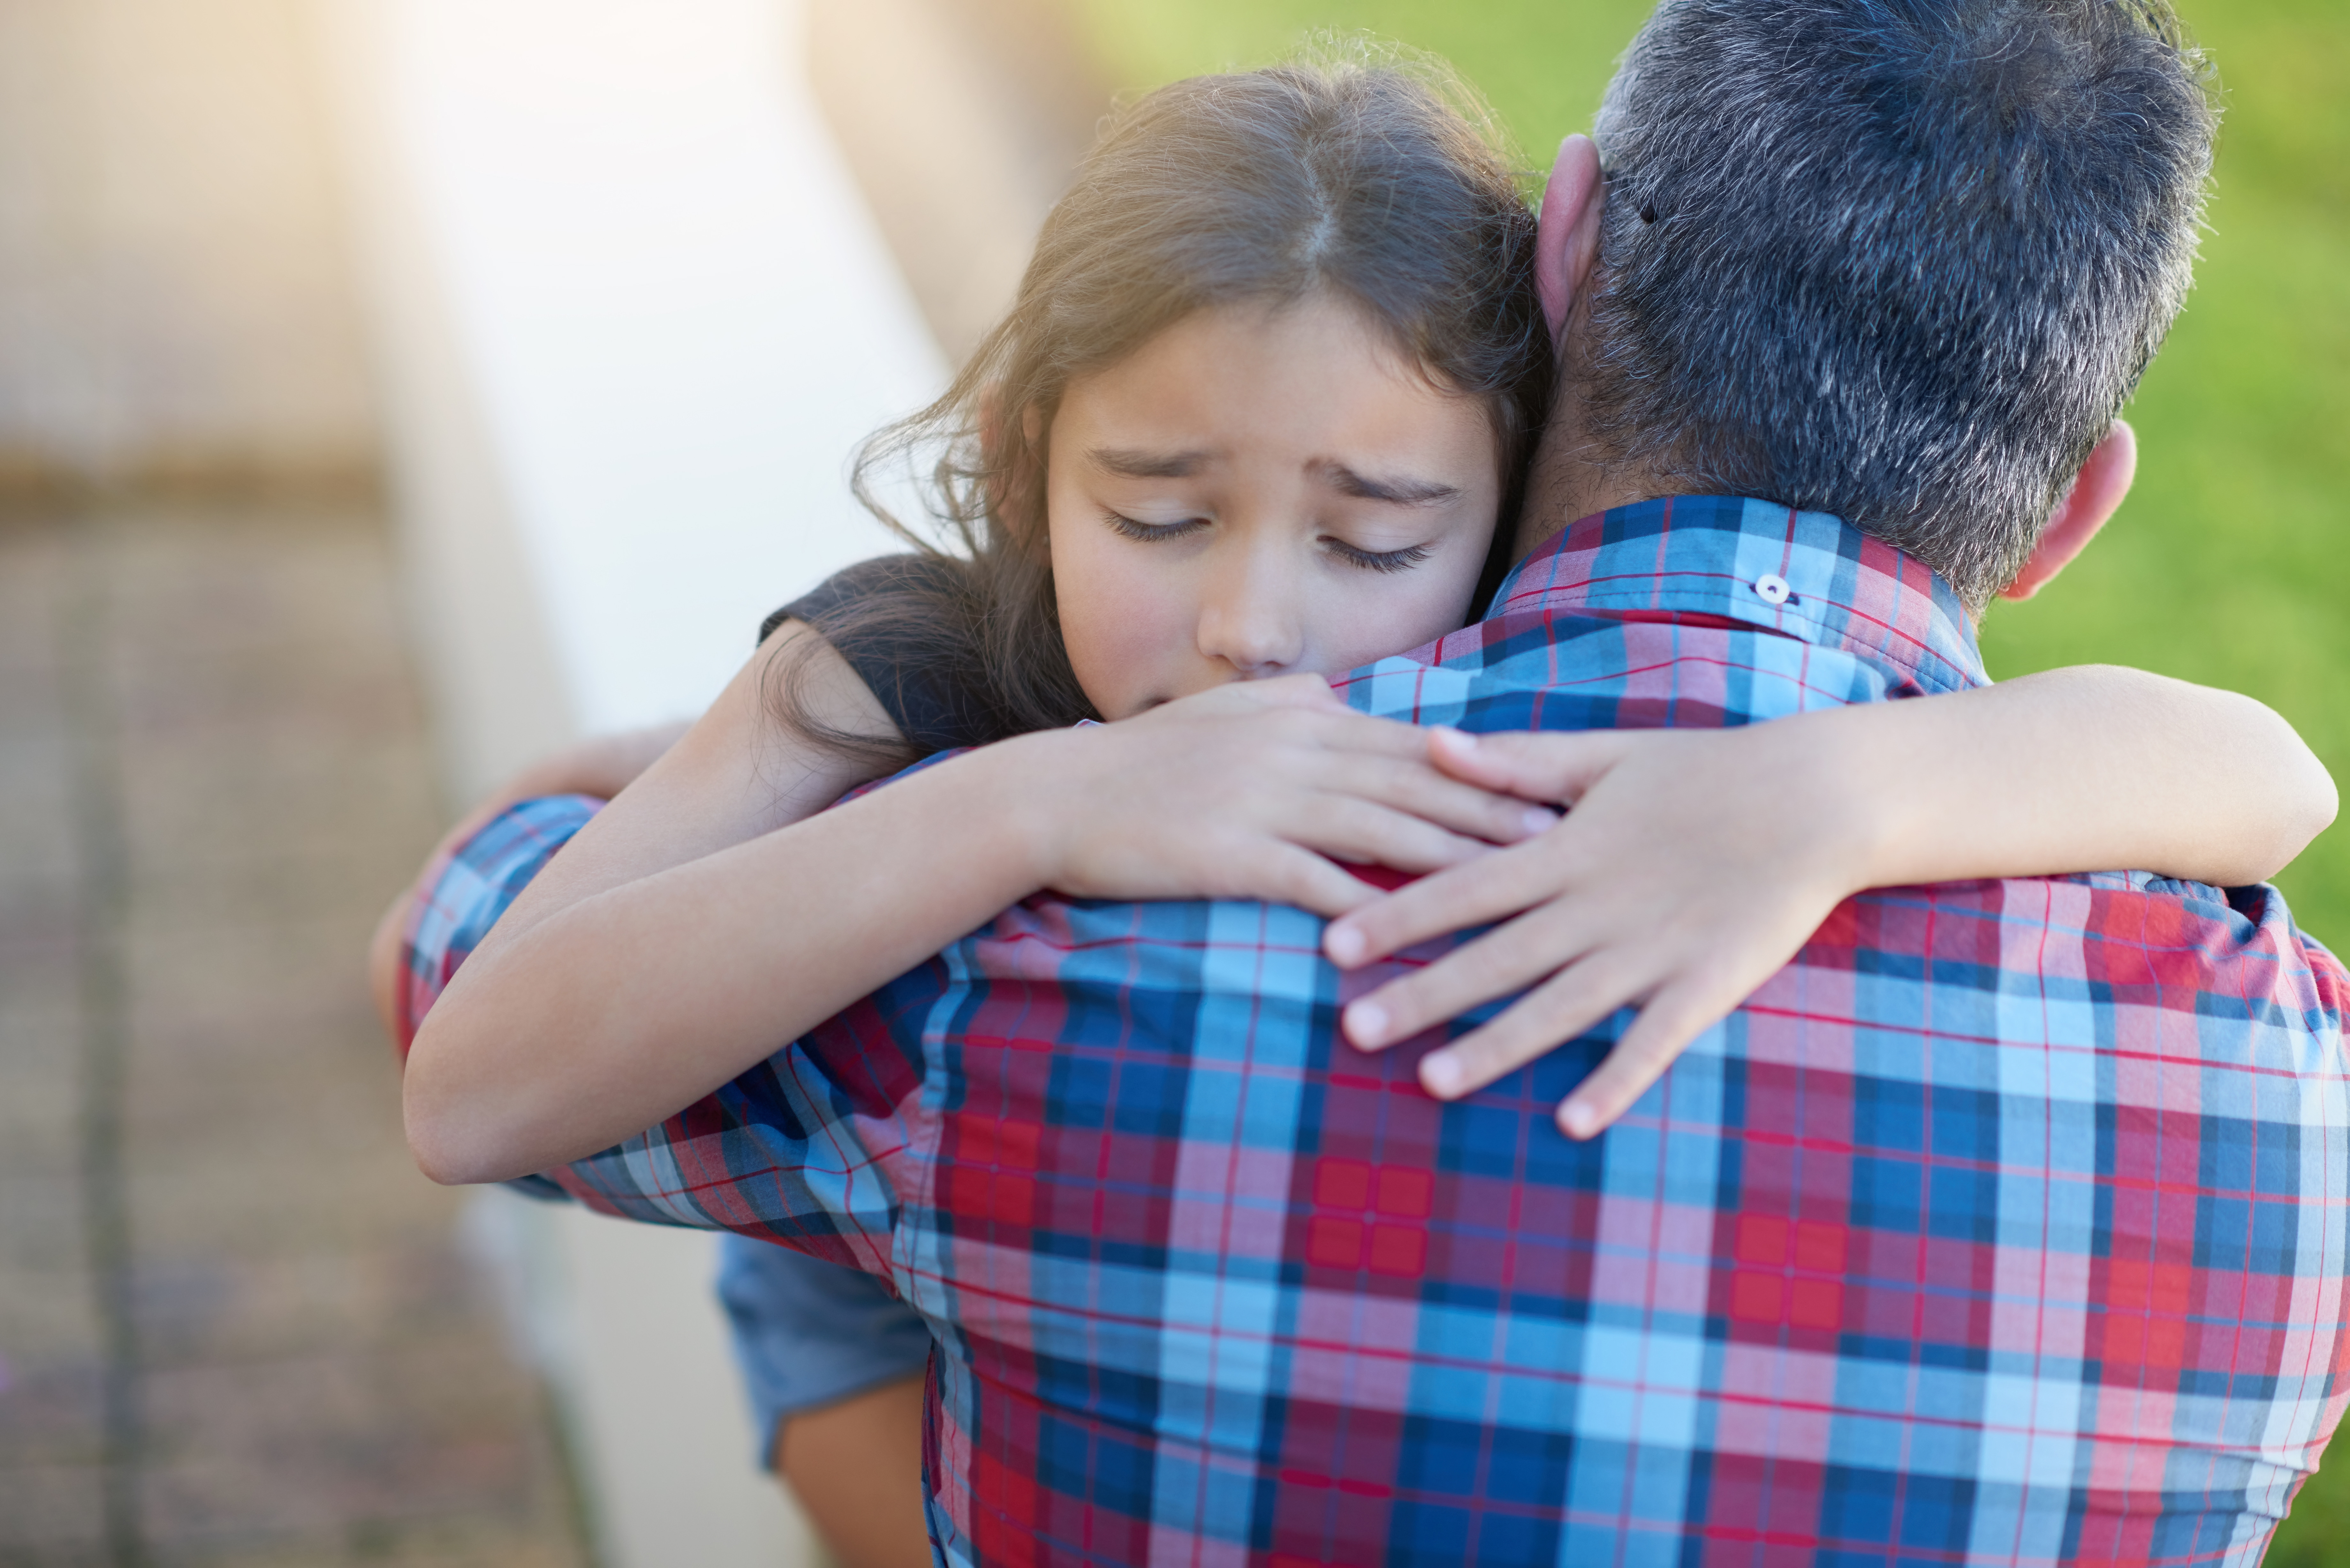 A father hugs his sad, young daughter to comfort her amid her heartache | Source: Shutterstock